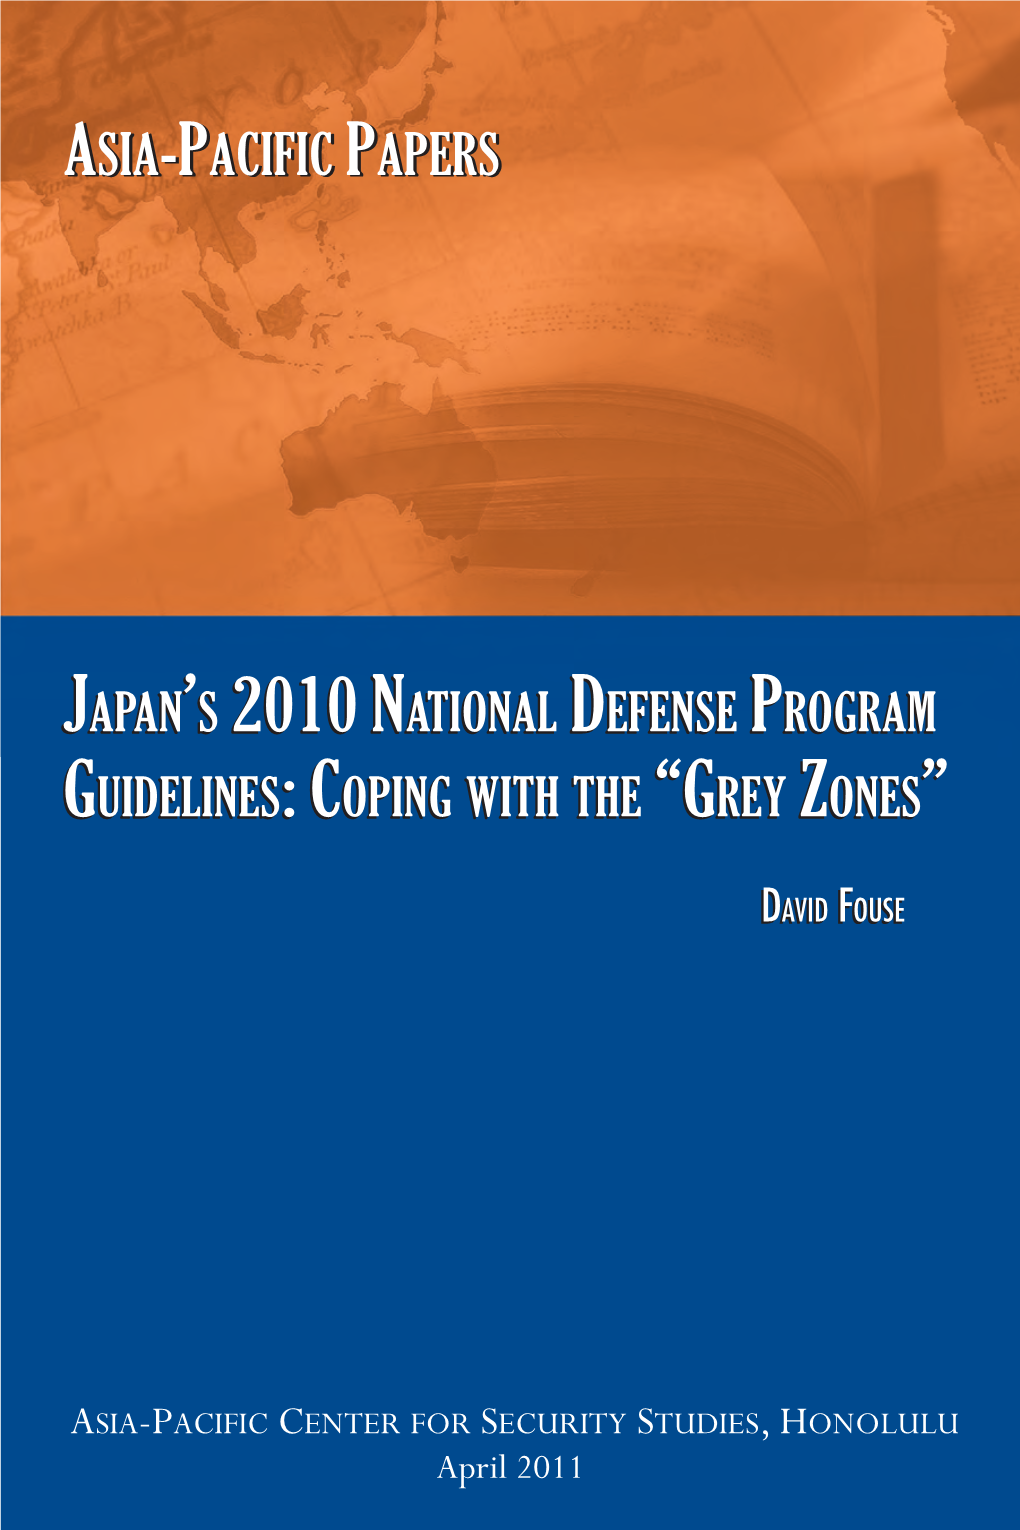 Japan's 2010 National Defense Program Guidelines: Coping With